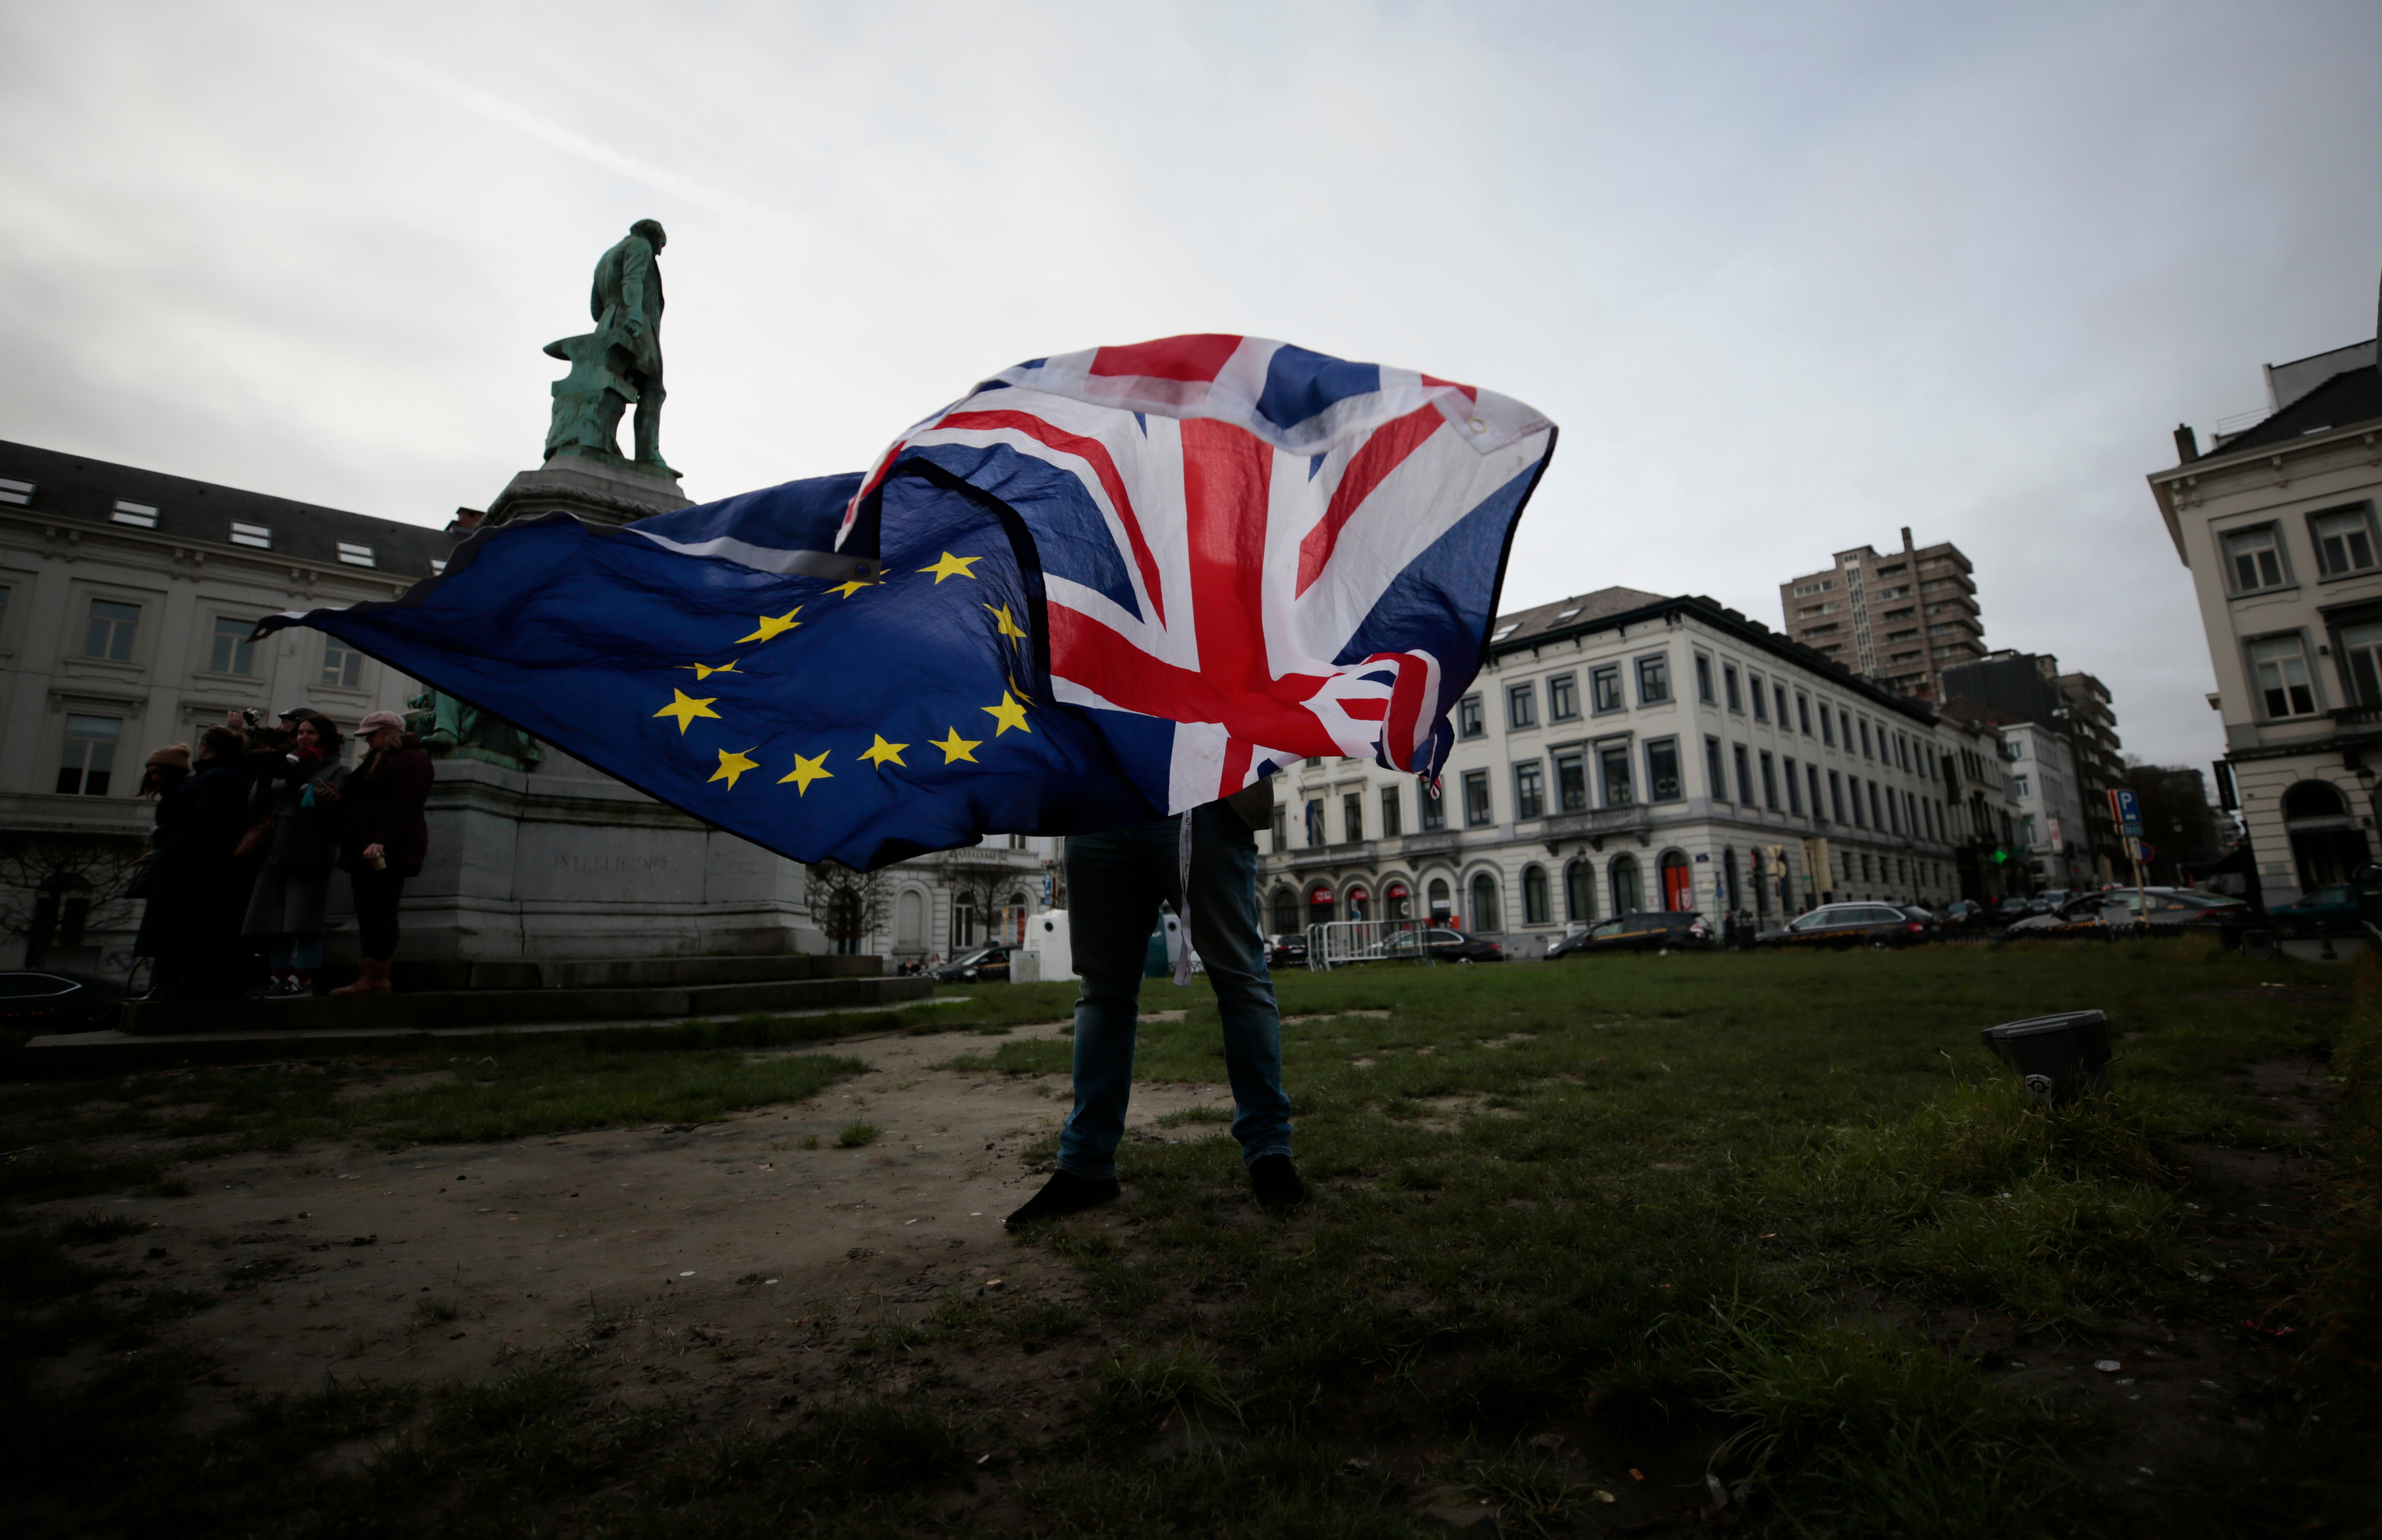 A man unfurls a union and EU flag outside the European parliament in Brussels